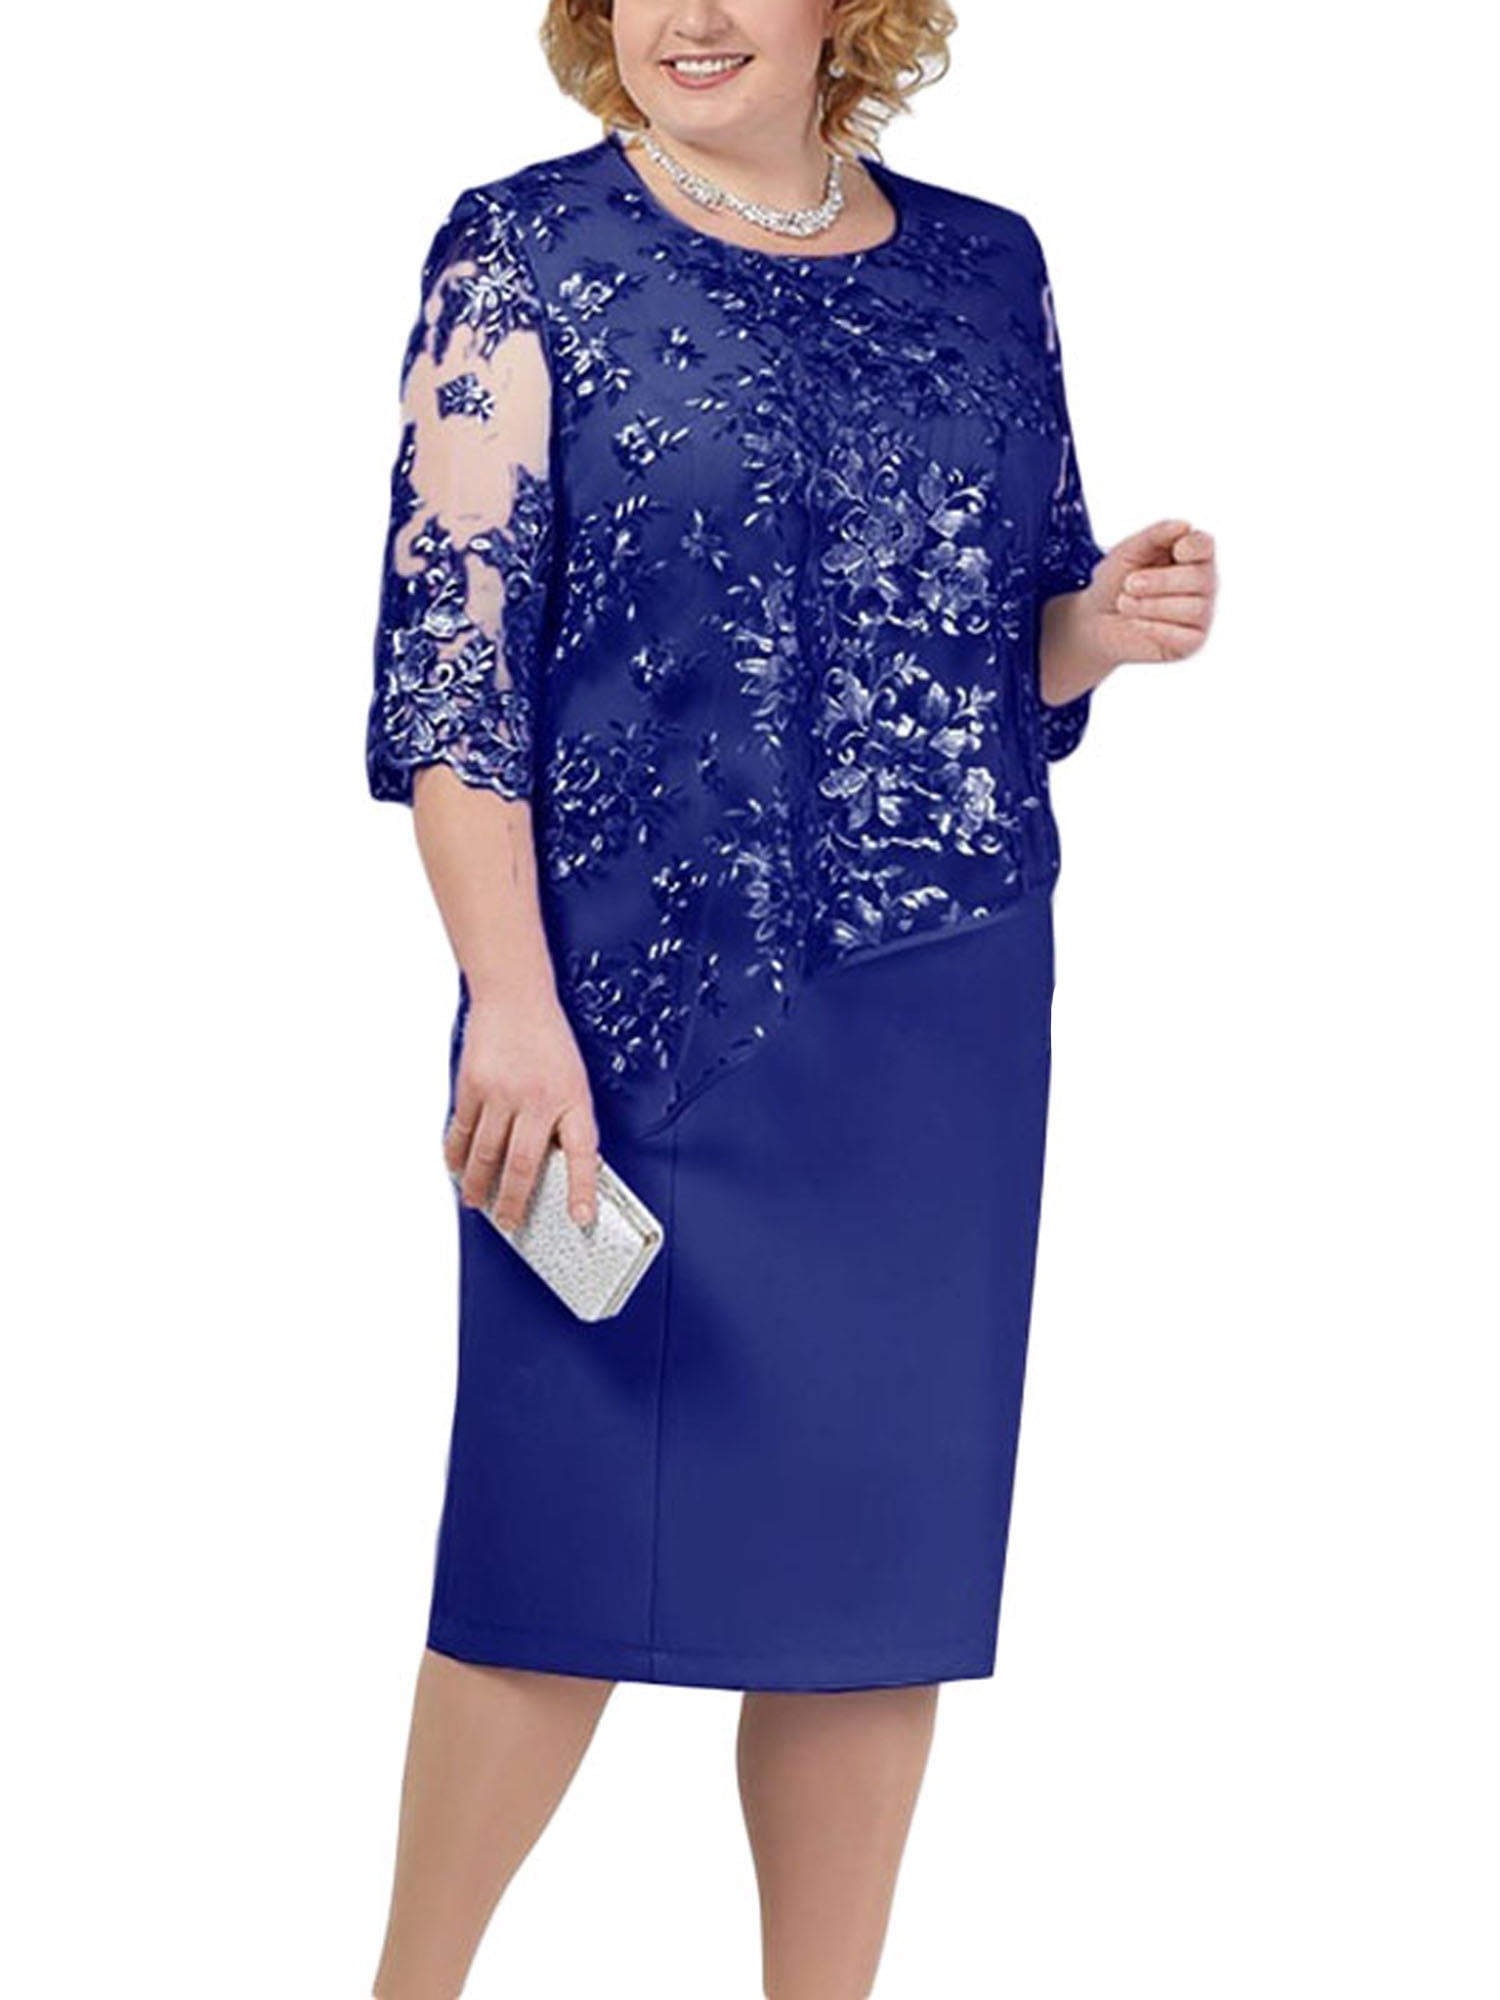 Lrady Women Plus Size Floral Lace 3/4 Sleeve Party Wedding Cocktail Swing Midi Dress with Pockets 